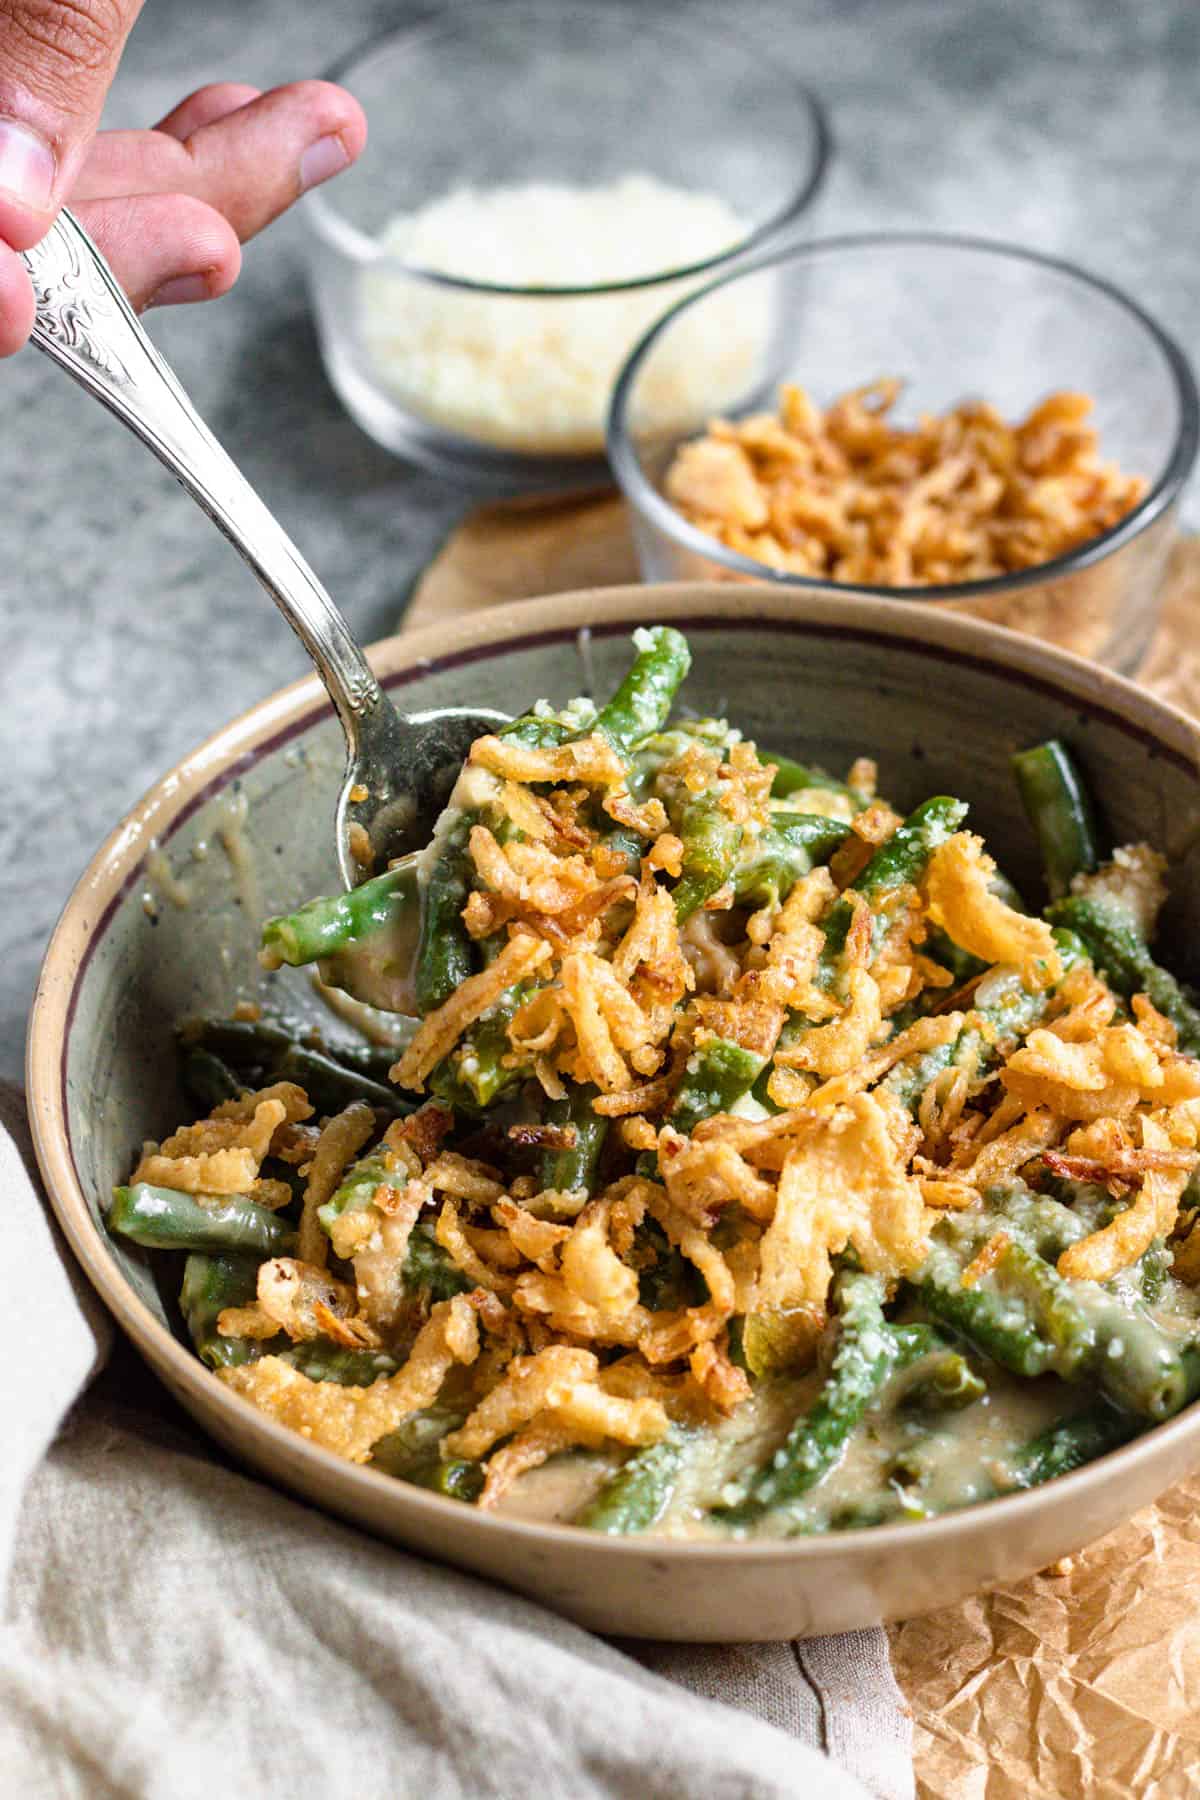 Hand spooning green bean casserole out of a bowl 